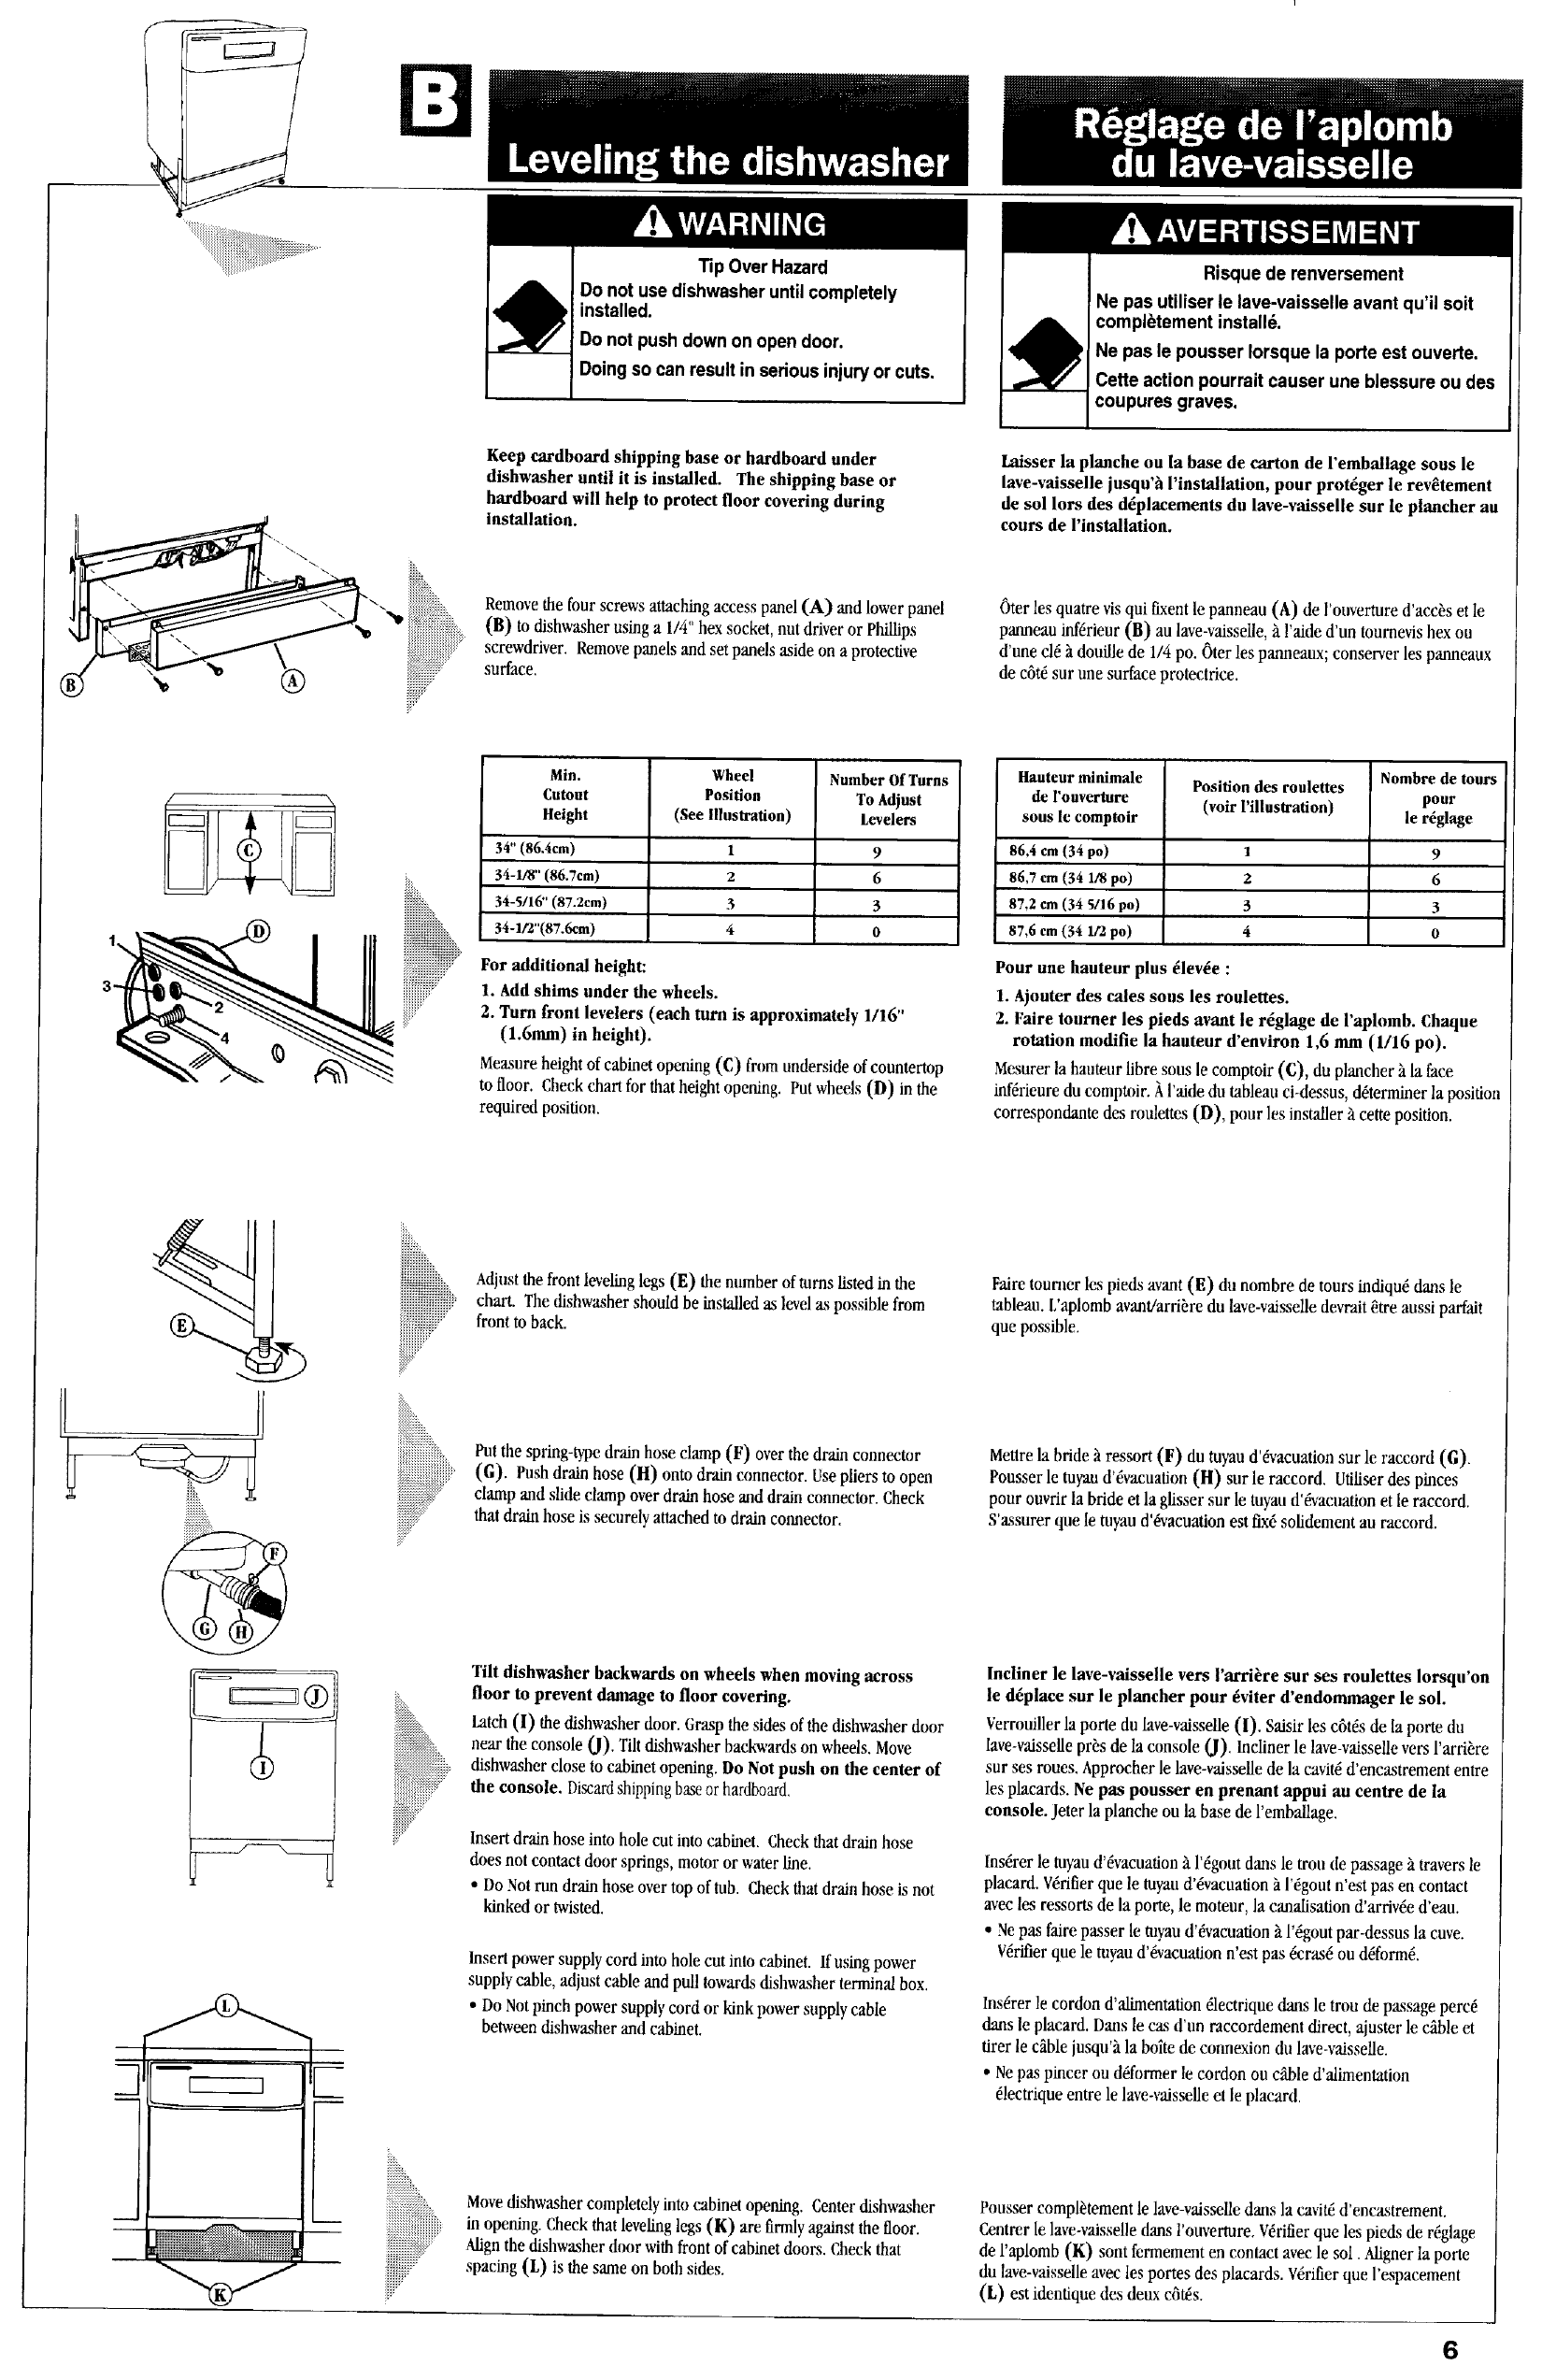 Page 6 of 11 - Kitchenaid KUDS24SEAL2 User Manual  UNDERCOUNTER DISHWASHER - Manuals And Guides L0711326